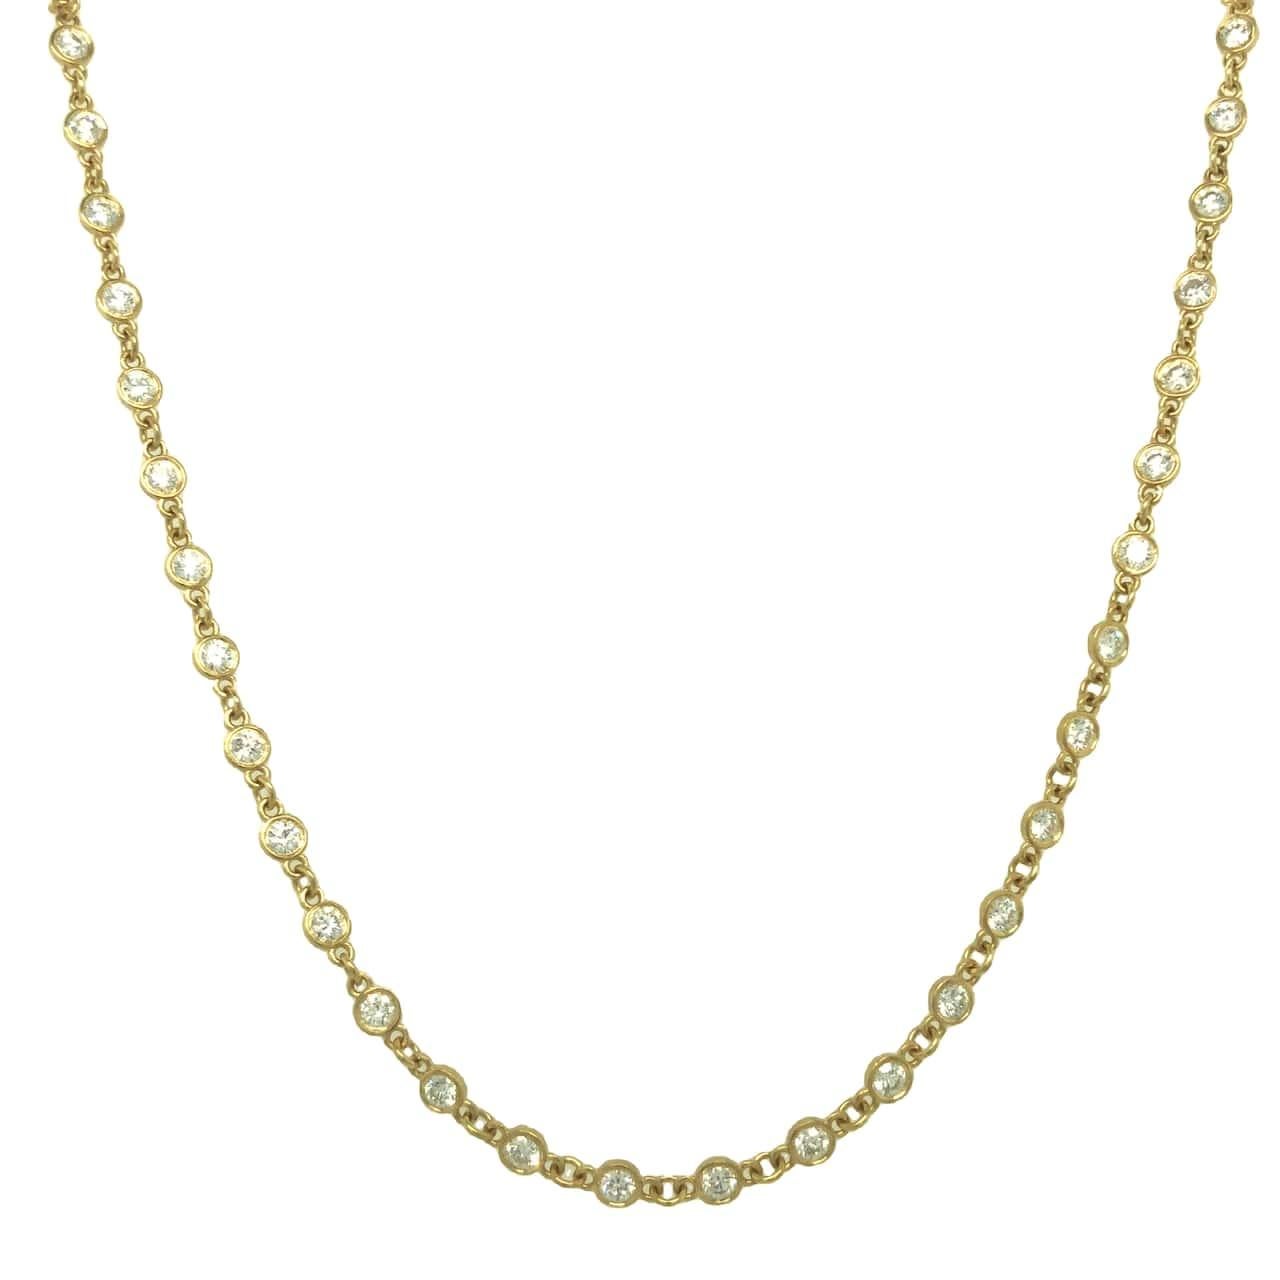 Gems Are Forever 3.25 Ct. Diamond Link Chain Necklace 18K Yellow Gold For Sale